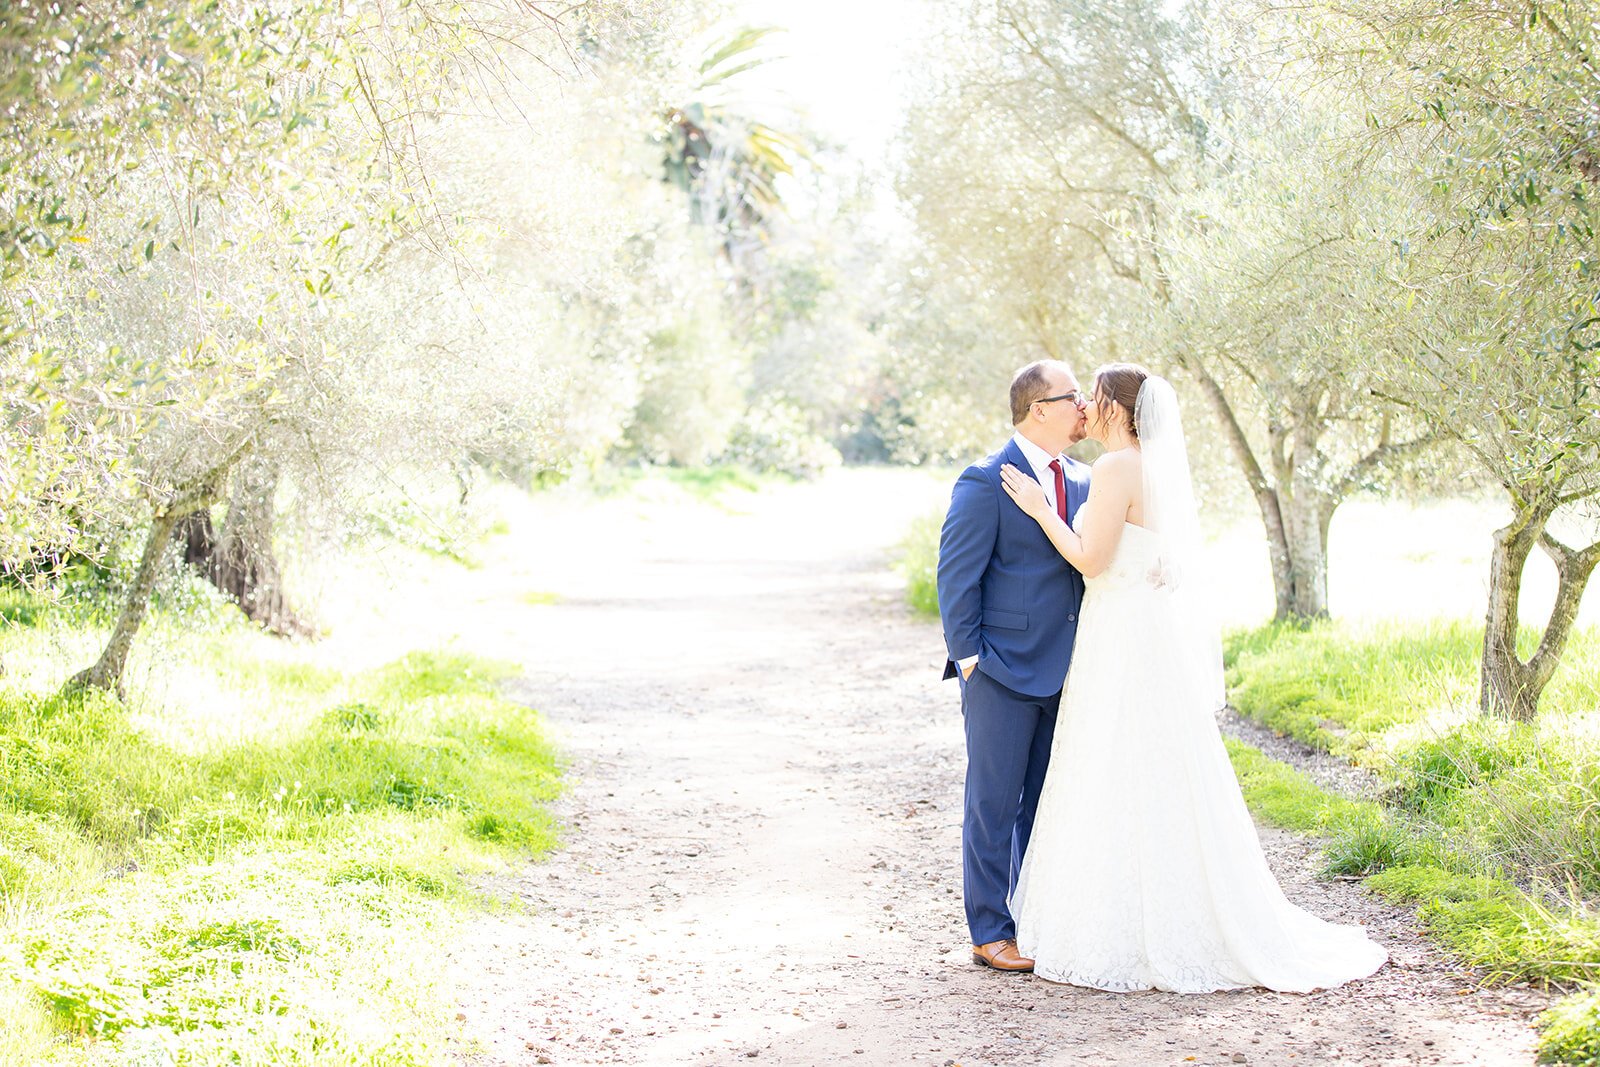 www.santabarbarawedding.com | Historic Rancho La Patera &amp; Stow House | Jocelyn &amp; Spencer | Woodland Events | The Bride and Groom Kiss on a Light Path